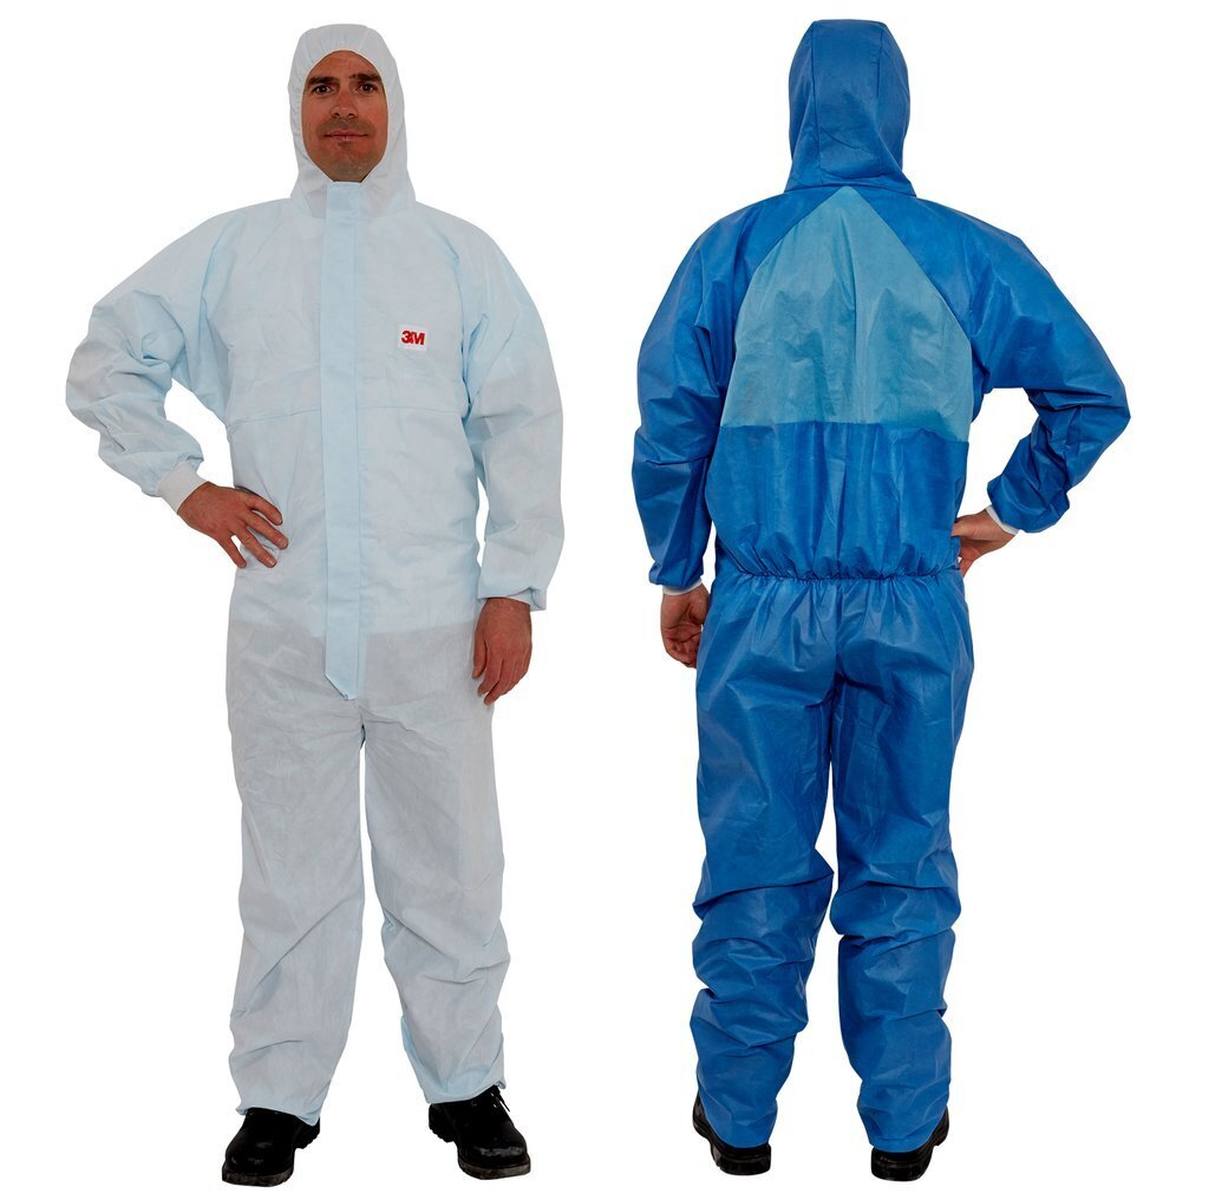 3M 4532+W2X, coverall, white, TYPE 5/6, size 2XL, material SSMMS low-linting, breathable, detachable zipper, knitted cuffs